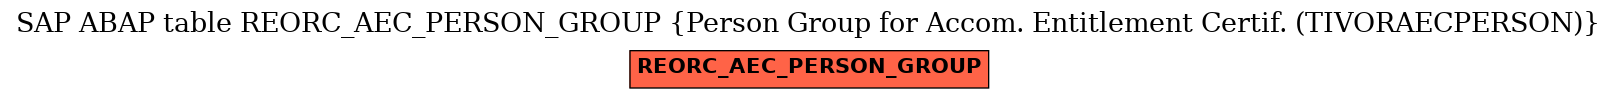 E-R Diagram for table REORC_AEC_PERSON_GROUP (Person Group for Accom. Entitlement Certif. (TIVORAECPERSON))